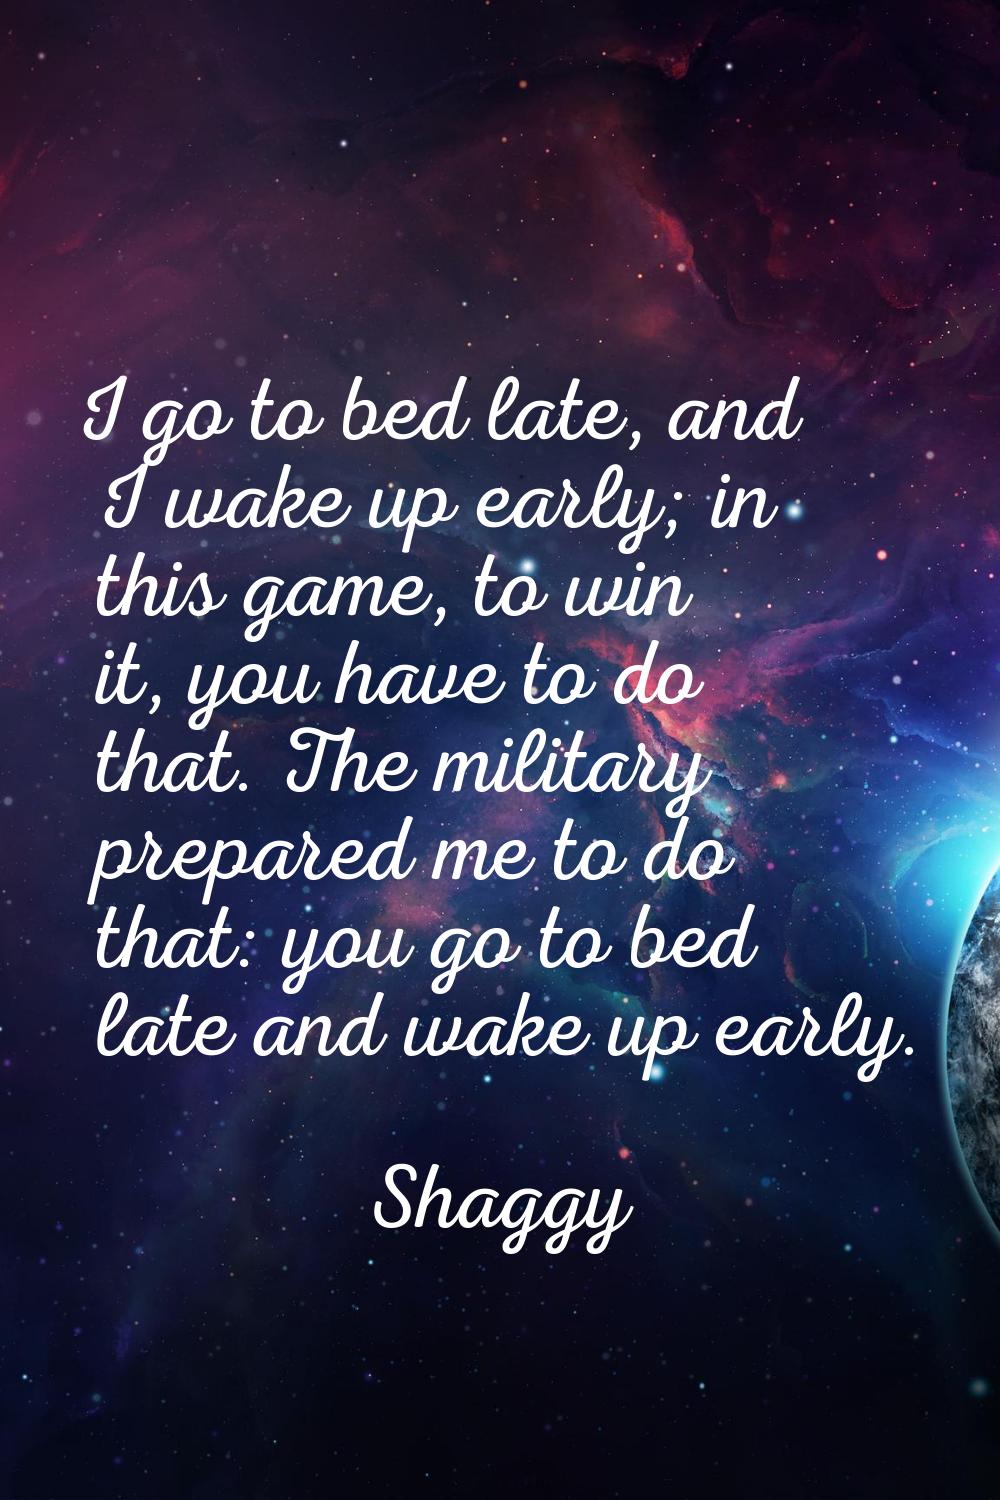 I go to bed late, and I wake up early; in this game, to win it, you have to do that. The military p